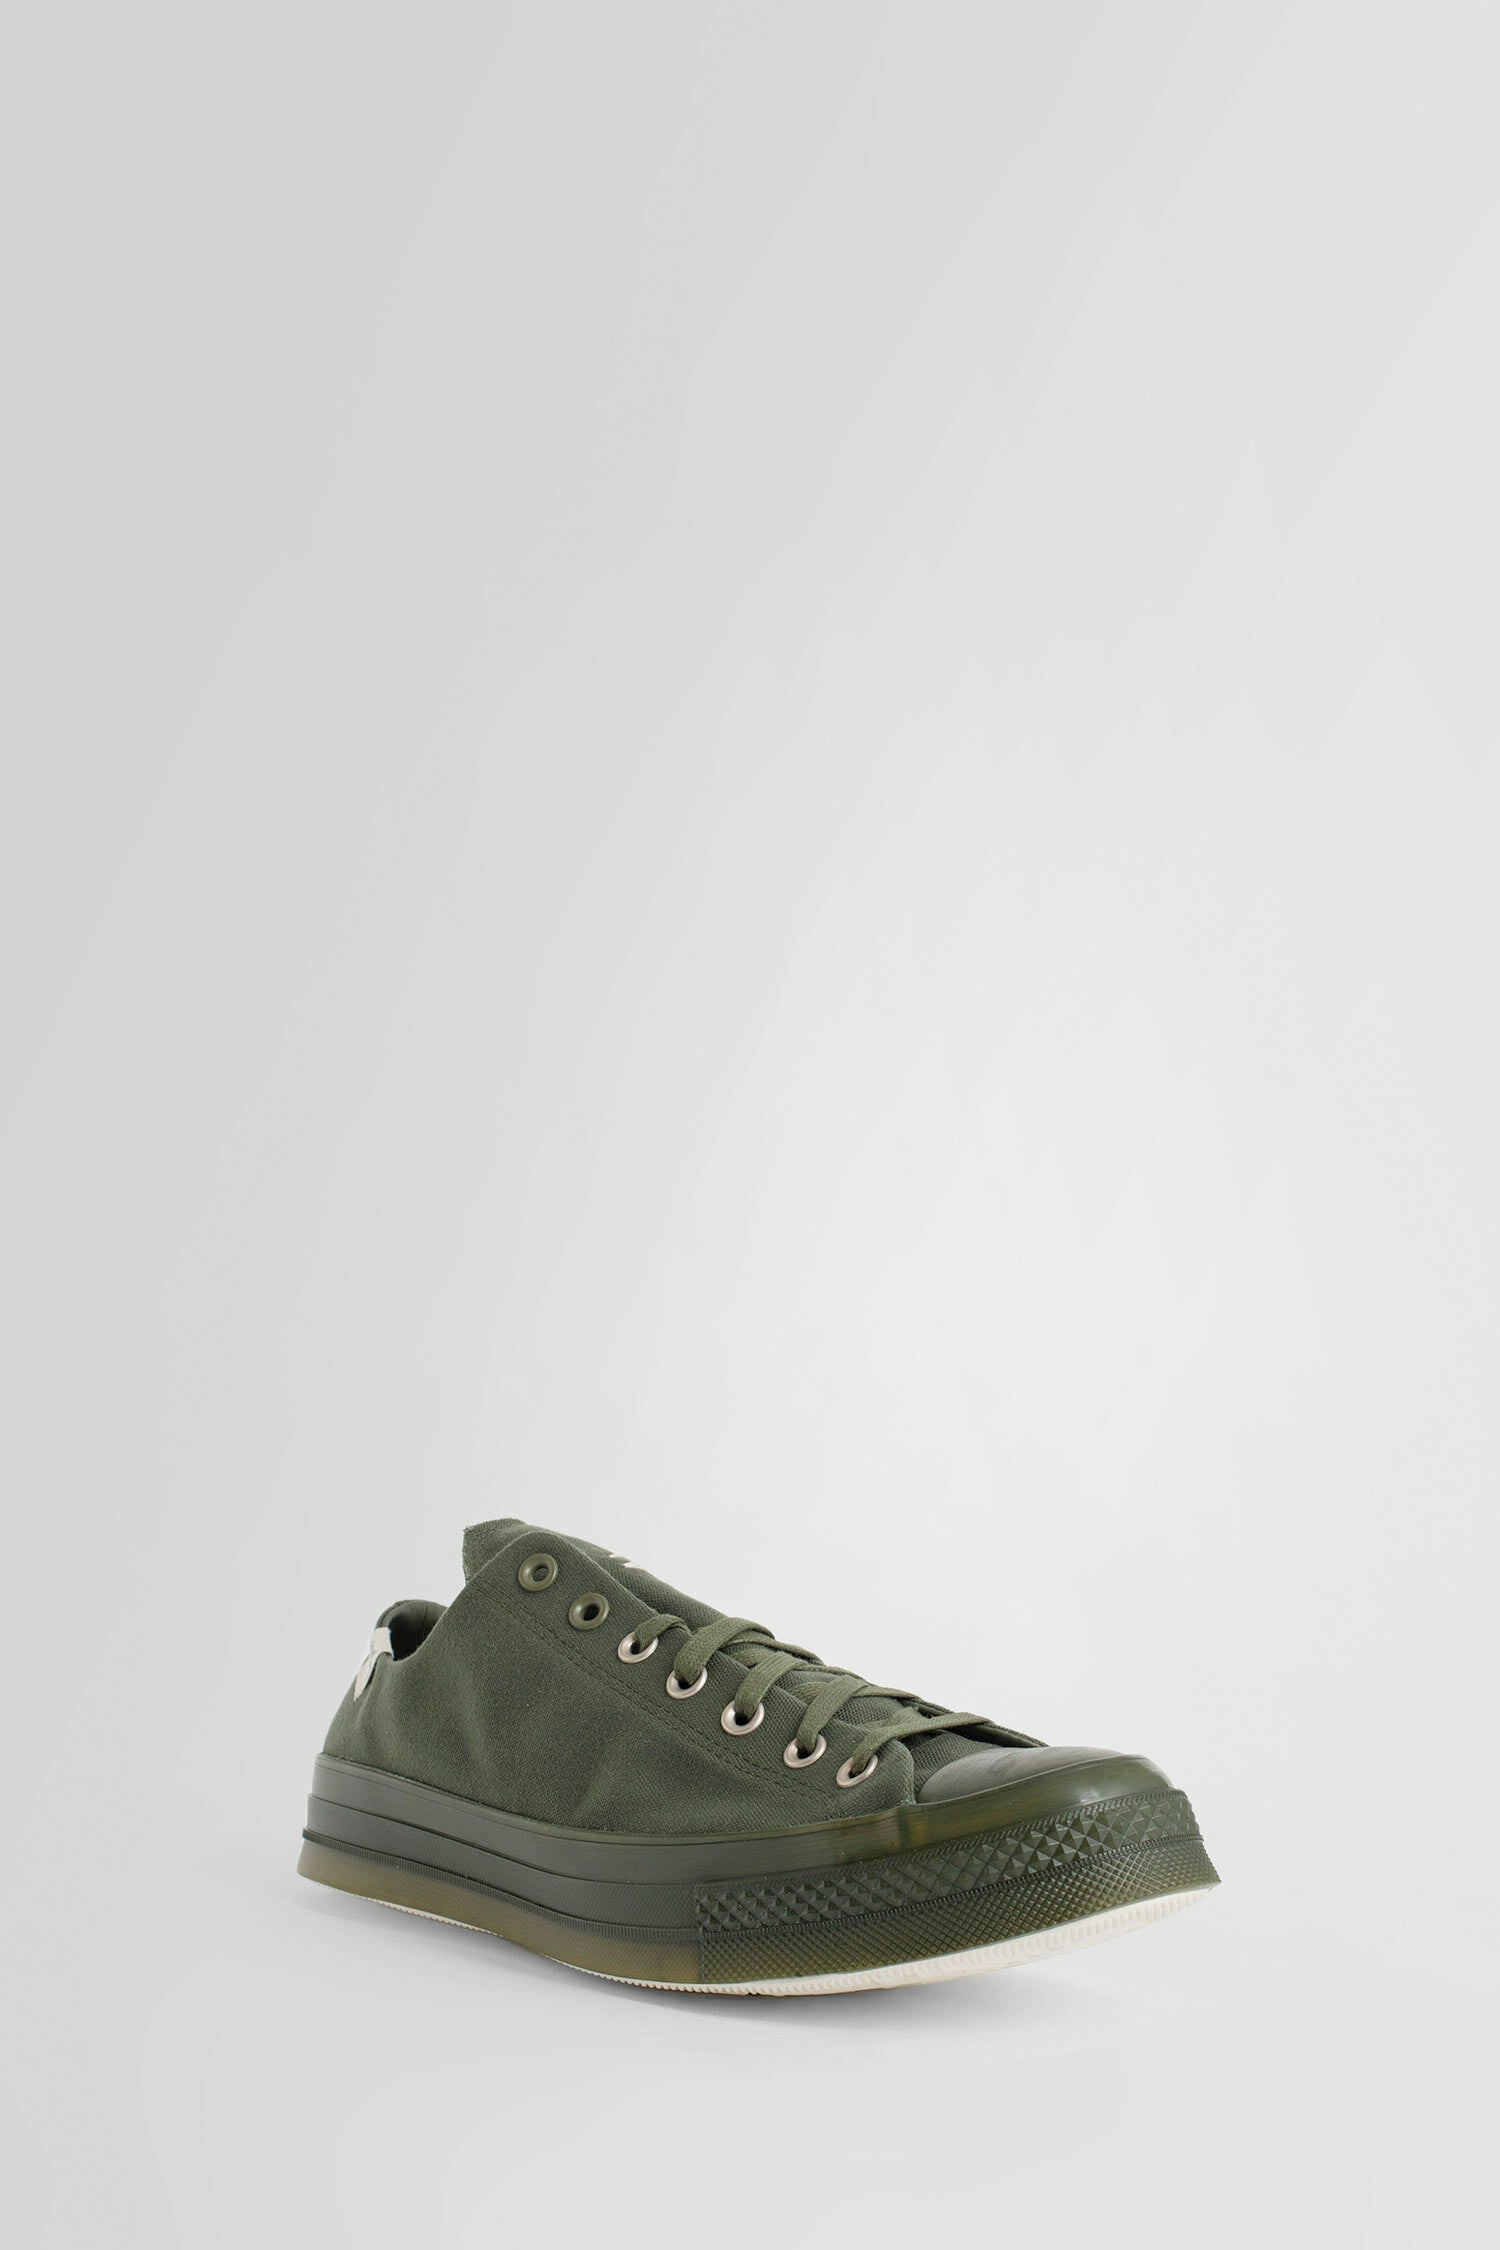 Converse x A-COLD-WALL* rifle green Chuck 70 ox Sneakers